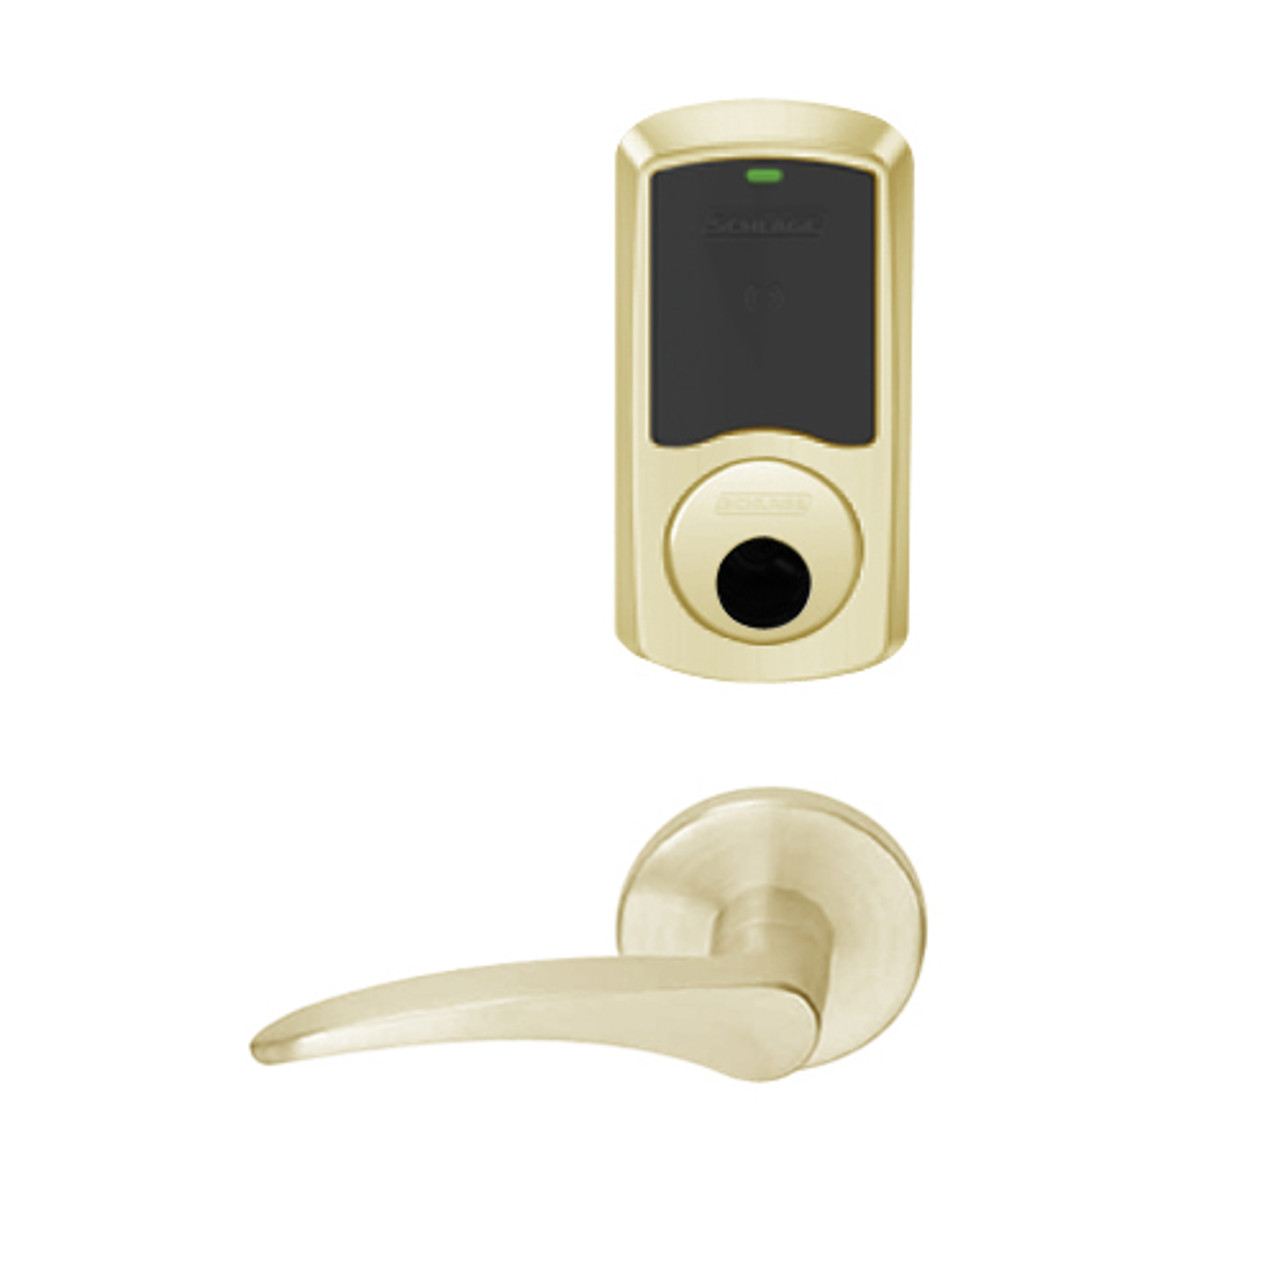 LEMD-GRW-L-12-606-00B-RH Schlage Less Cylinder Privacy/Apartment Wireless Greenwich Mortise Deadbolt Lock with LED and 12 Lever in Satin Brass